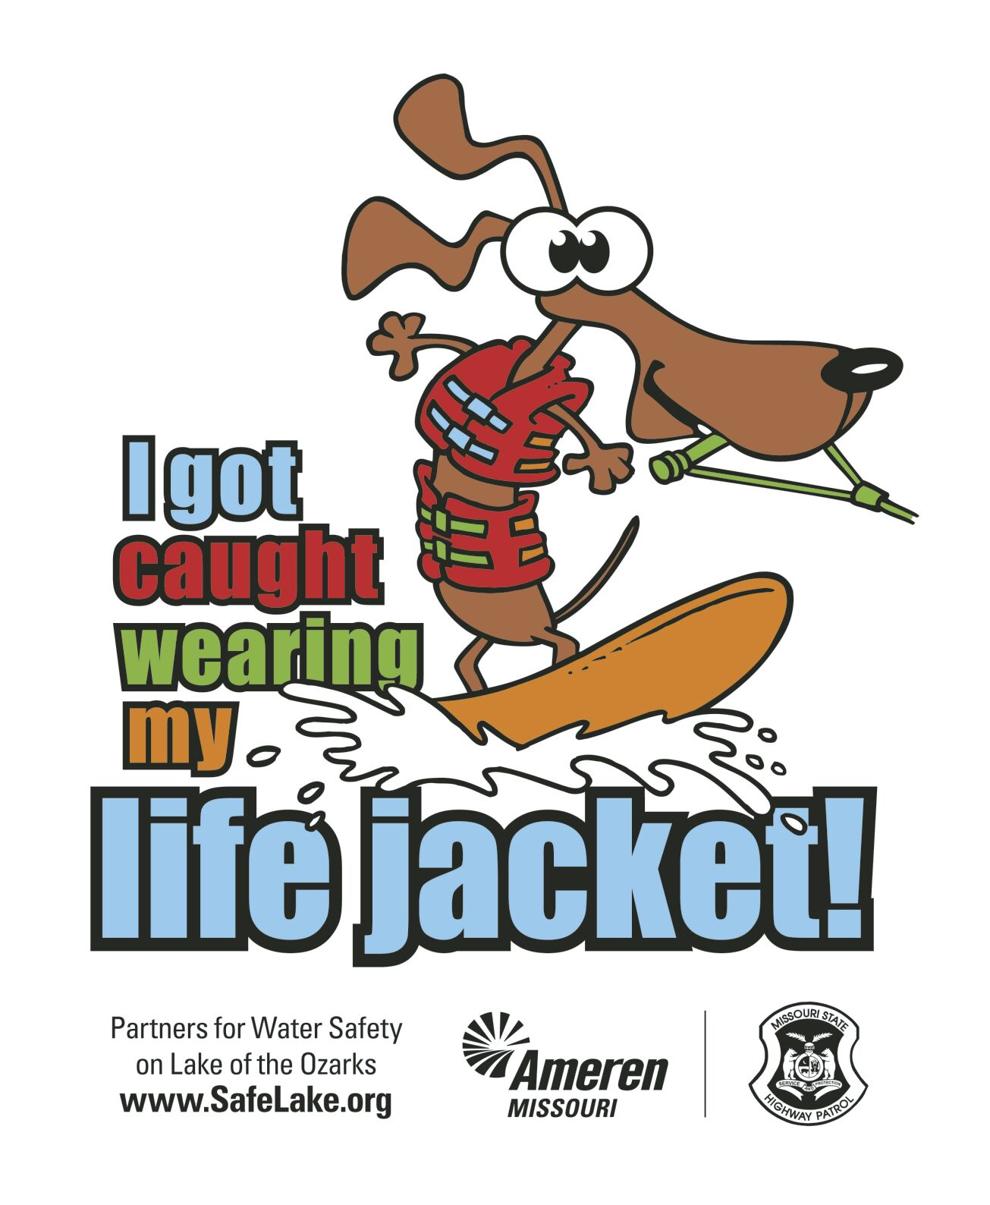 Safe boating is rewarded with a free T-shirt at the Lake of the Ozarks ...